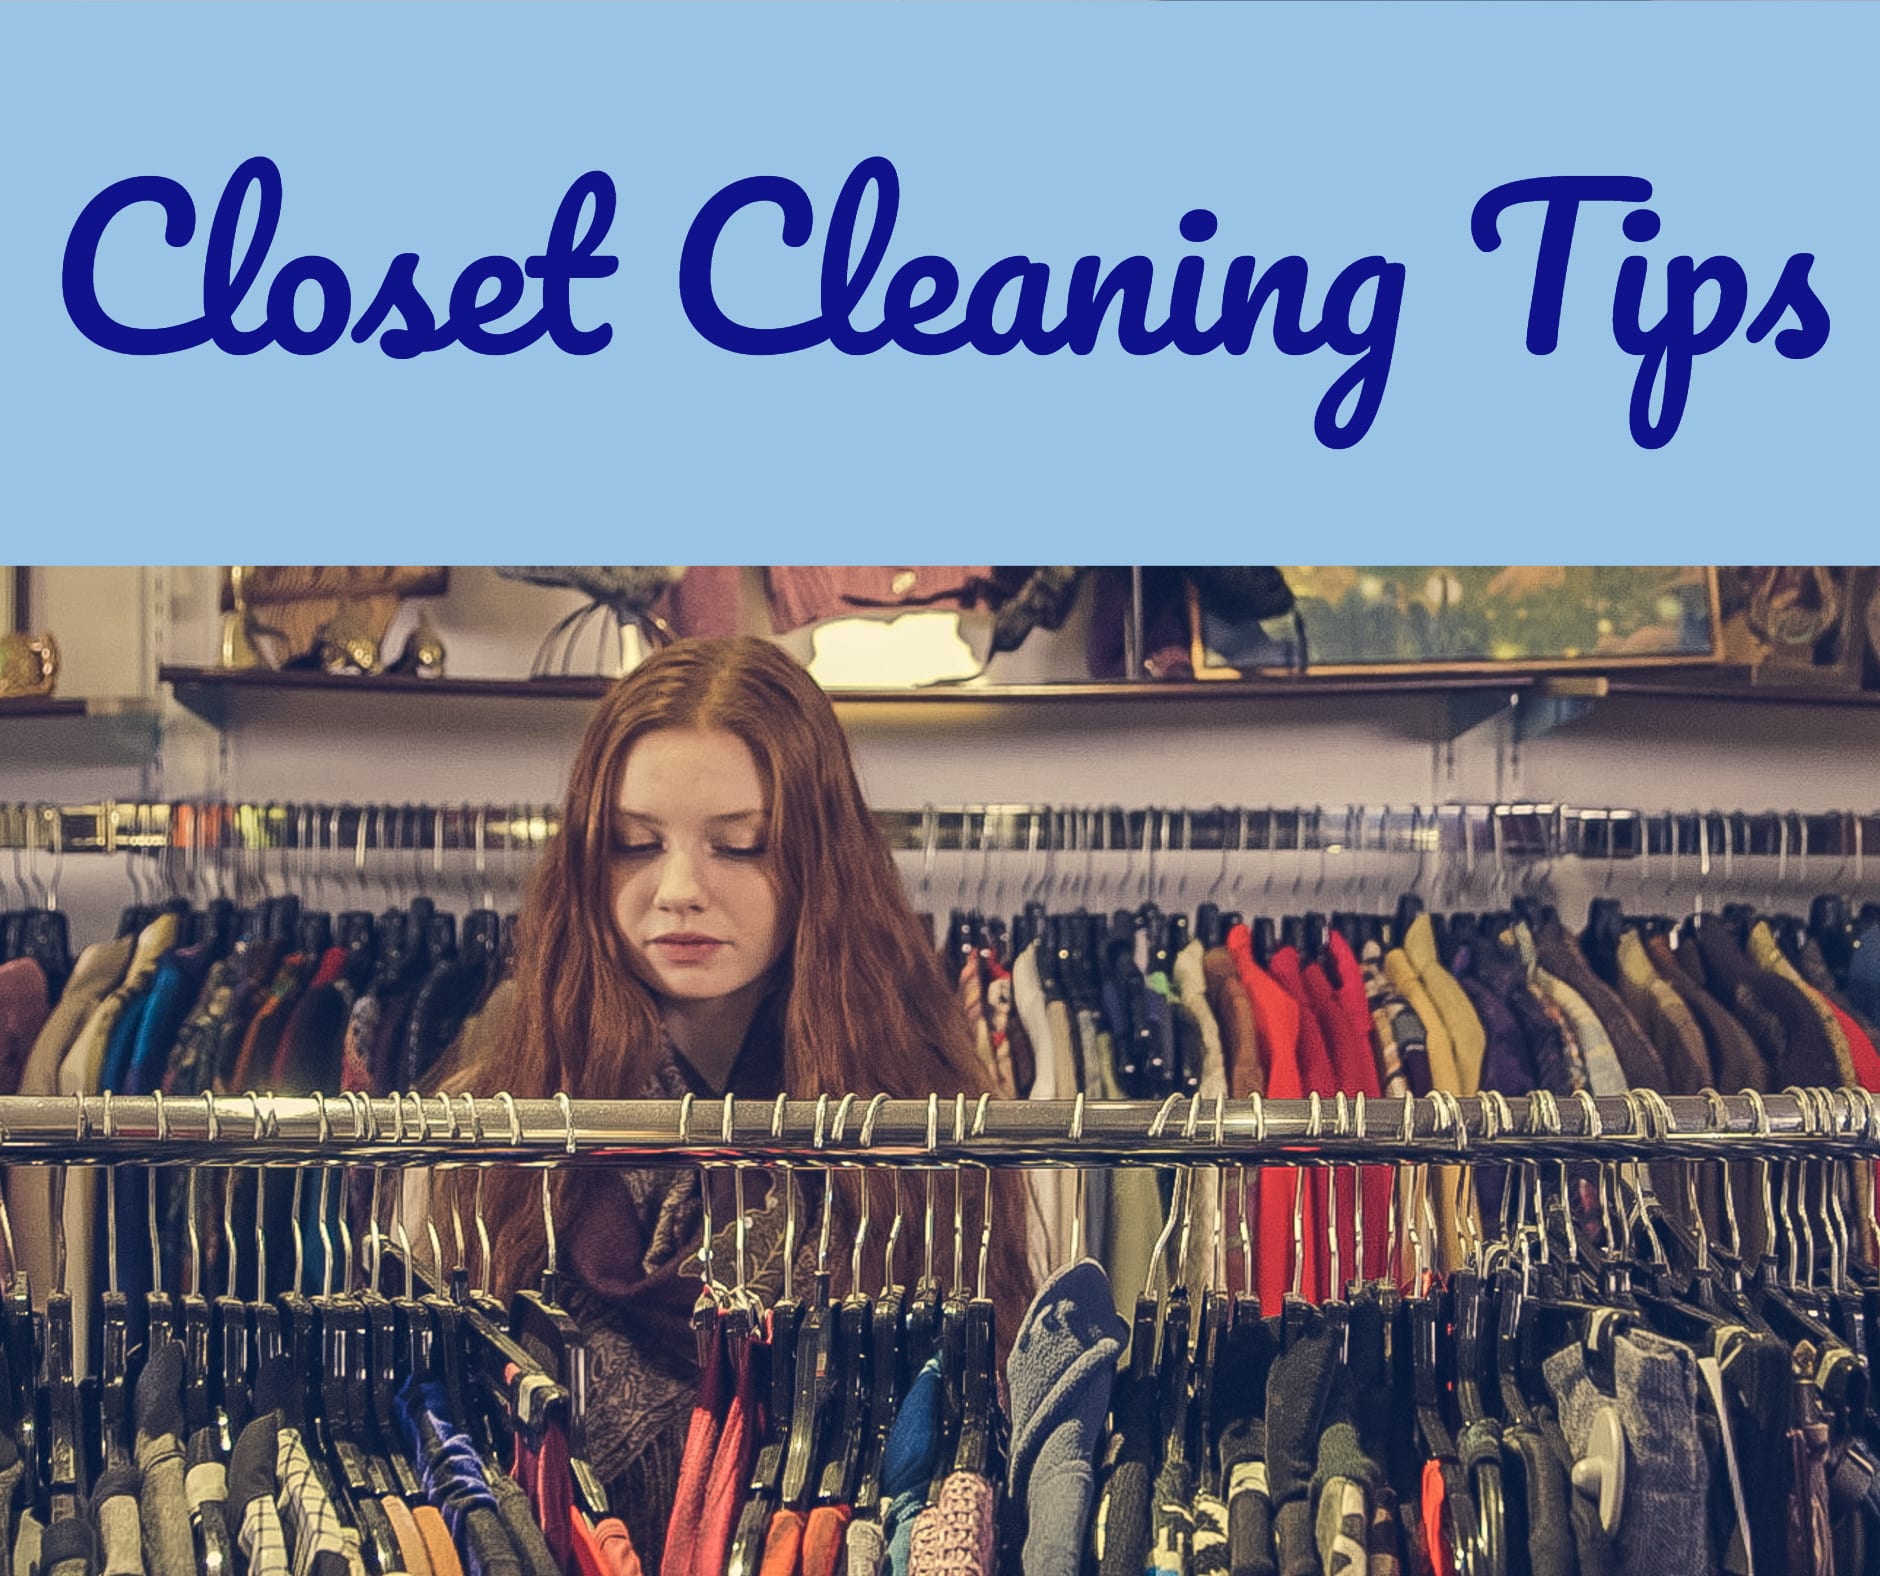 Closet Cleaning Tips from a Professional Maid Service